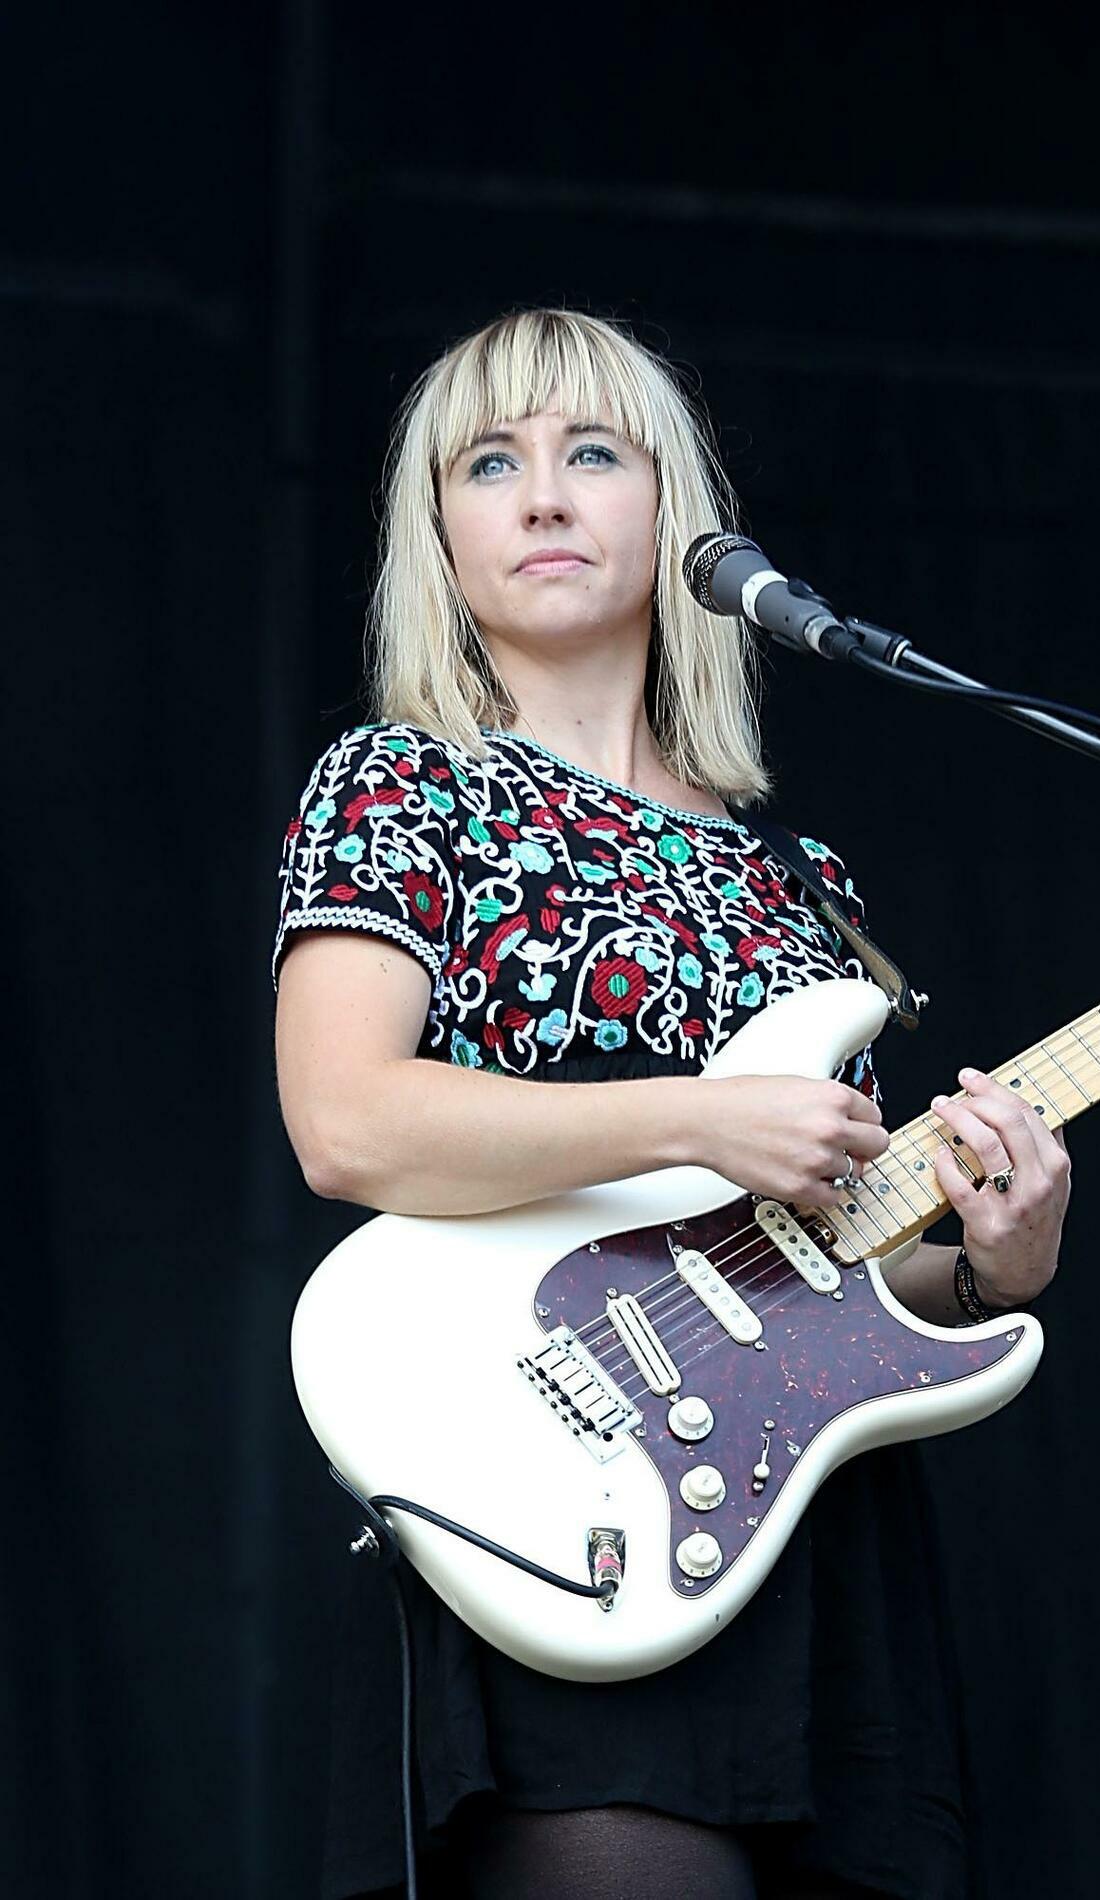 A The Joy Formidable live event